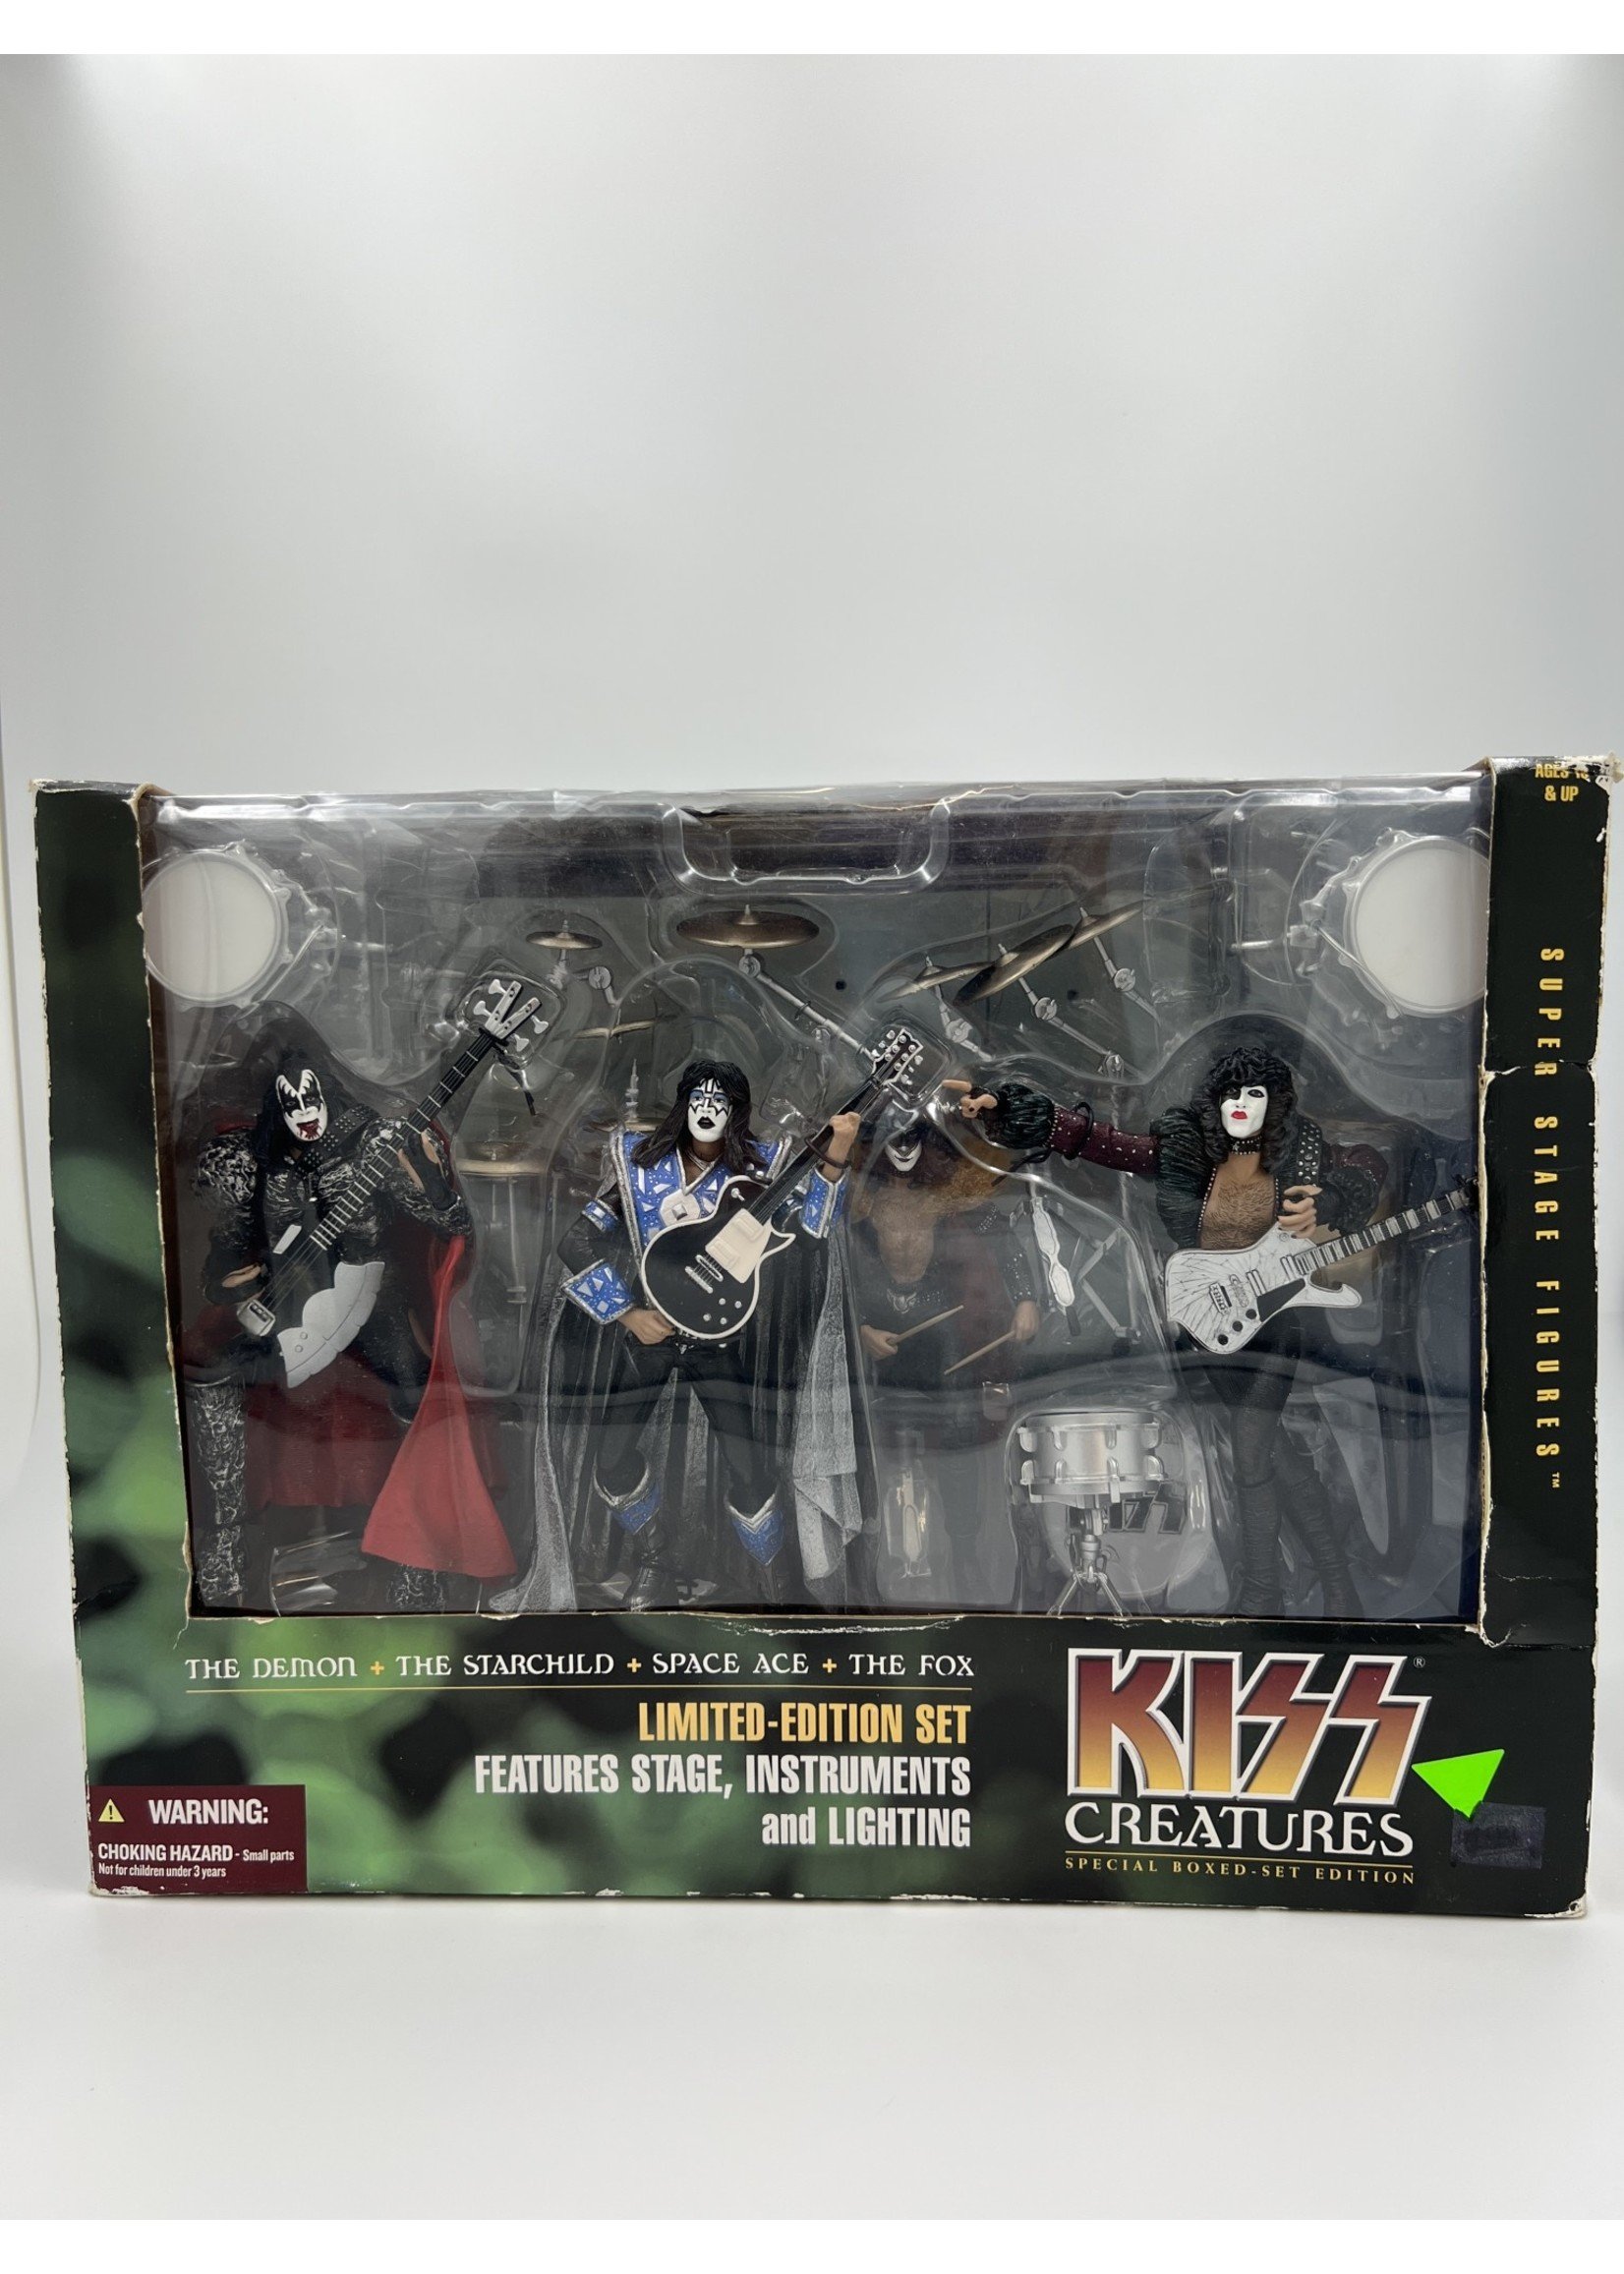 Action Figures Kiss Creatures Special Boxed Set Limited Edition Mcfarlane Toys